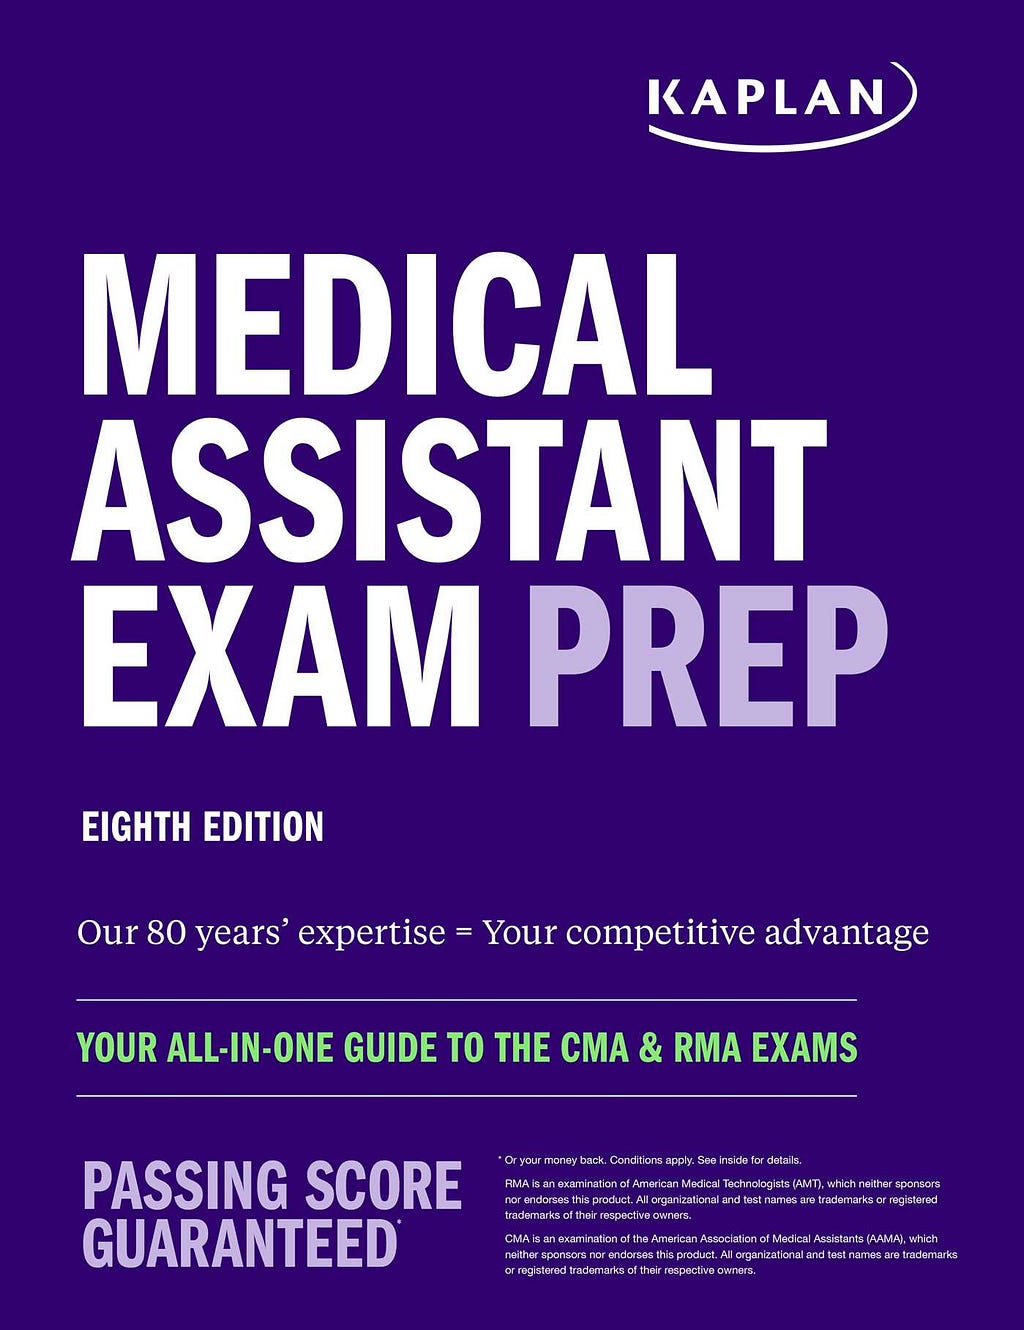 Medical Assistant Exam Prep: Your All-in-One Guide to the CMA & RMA Exams (Kaplan Test Prep) E book